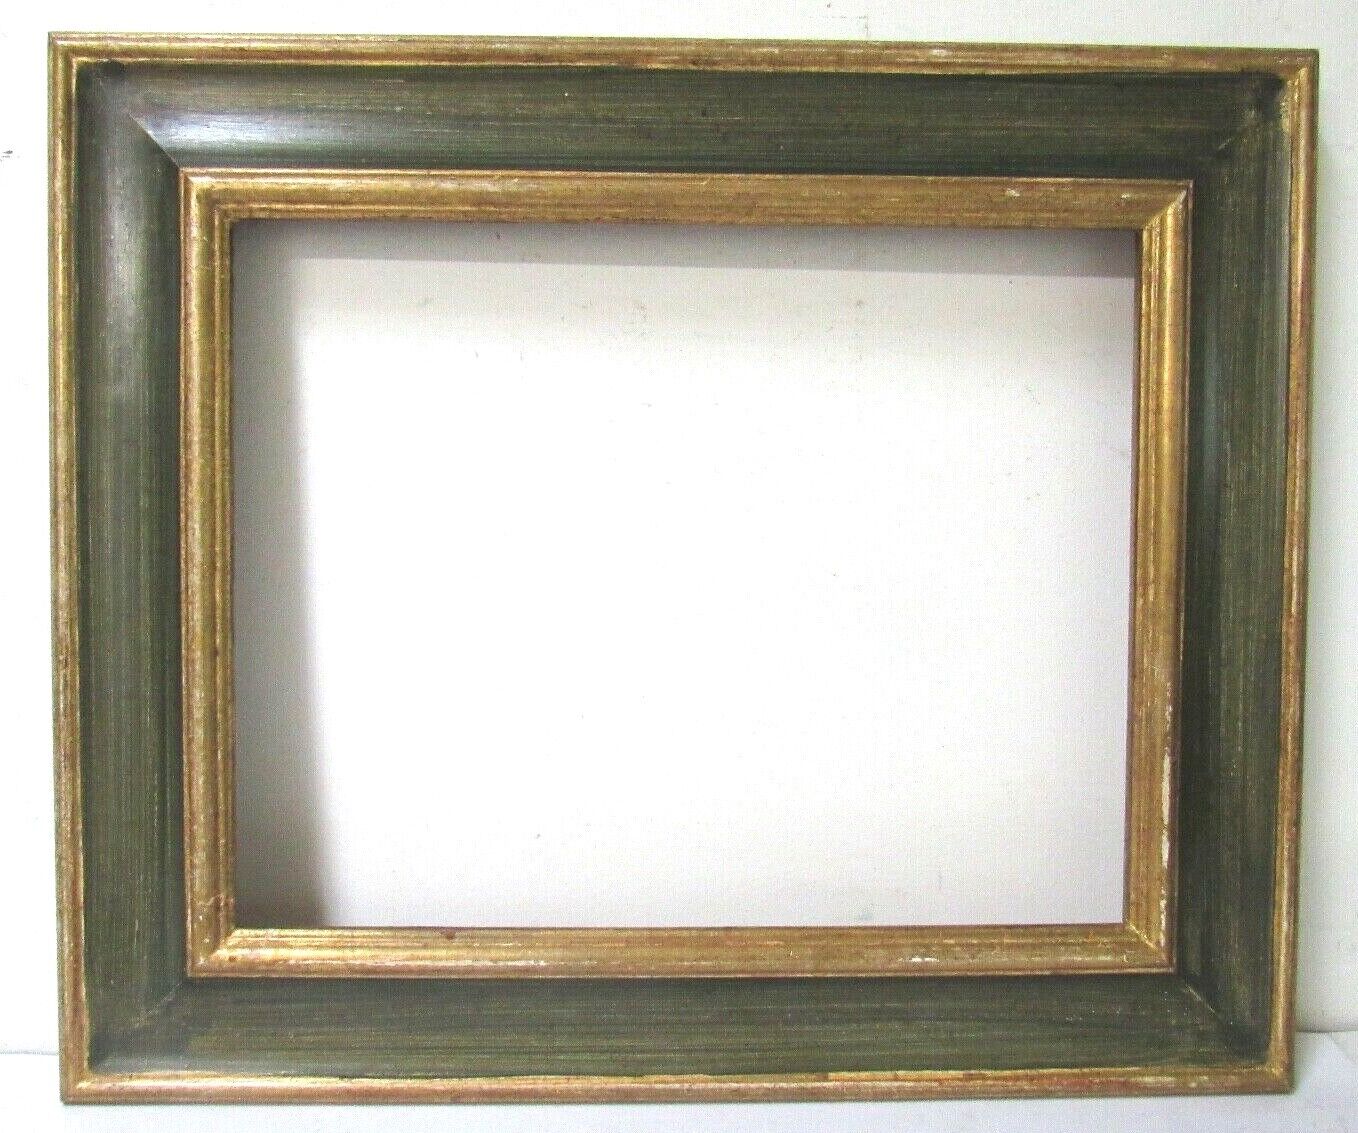 VINTAGE GREEN / GILDED WOOD FRAME FOR PAINTING 14 1/2 X 11 1/2  INCH  (d-28)